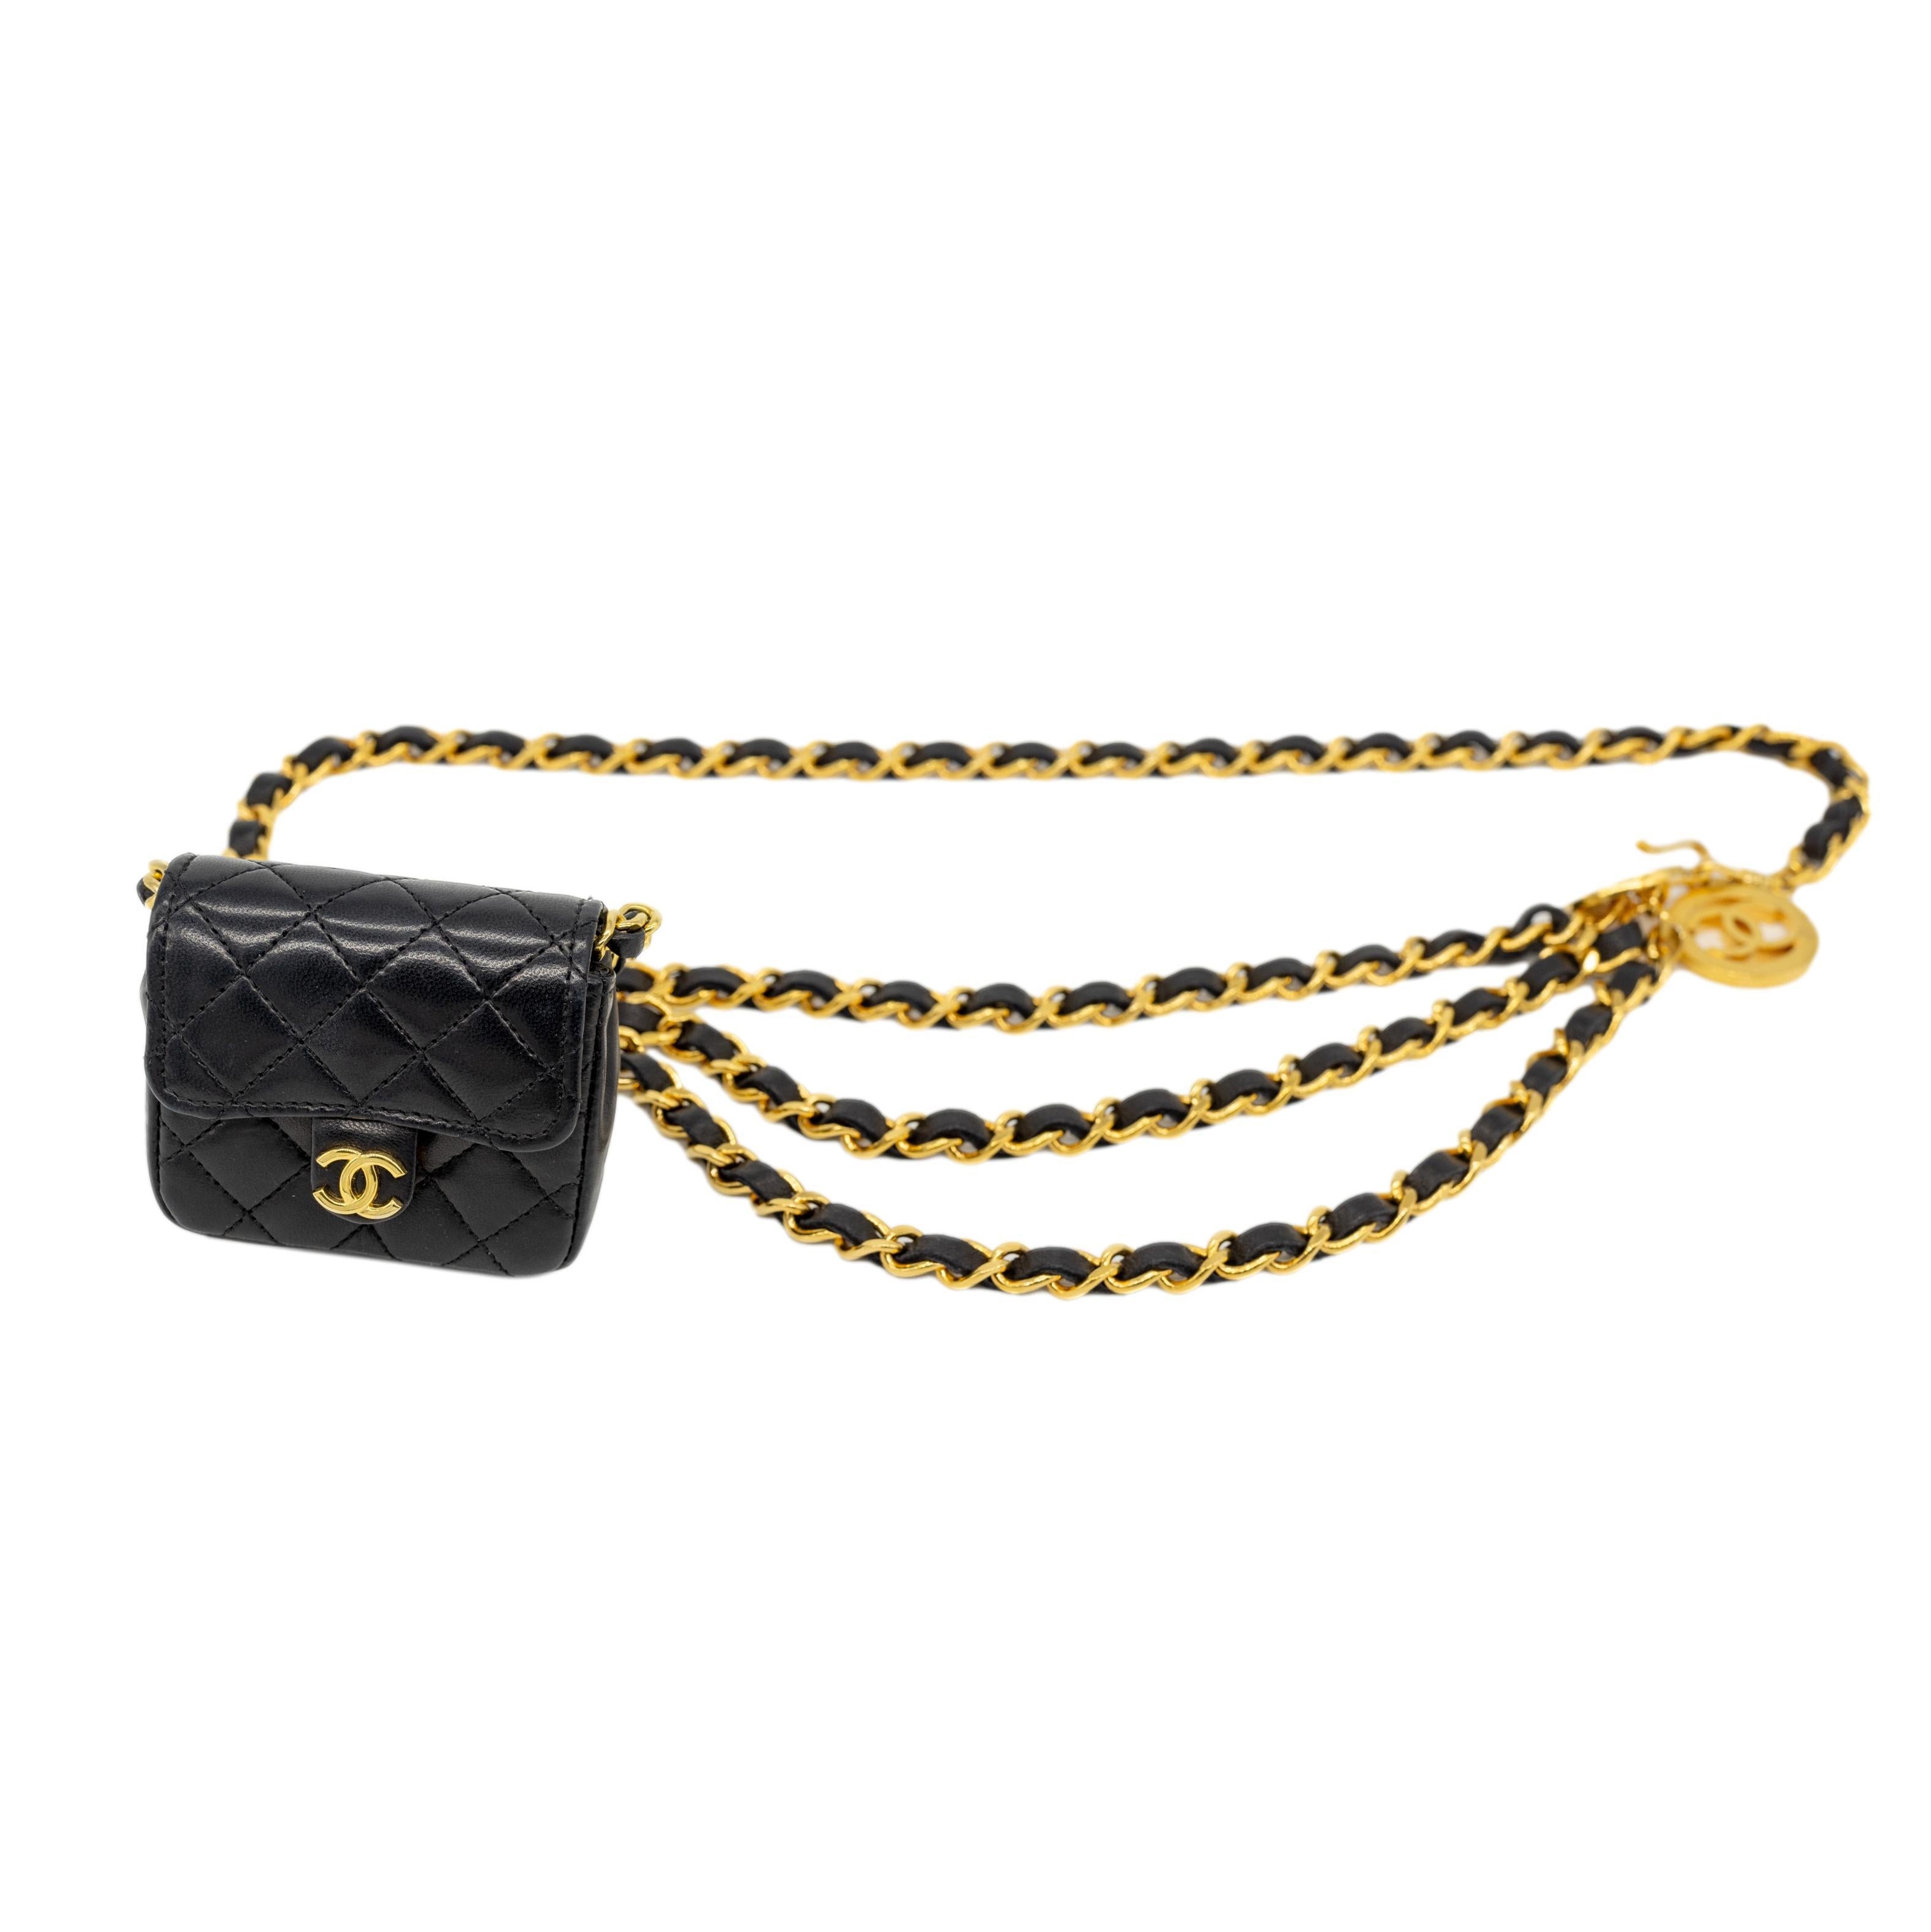 Vintage Chanel 1990s Micro Mini Lambskin Quilted Belt Bag